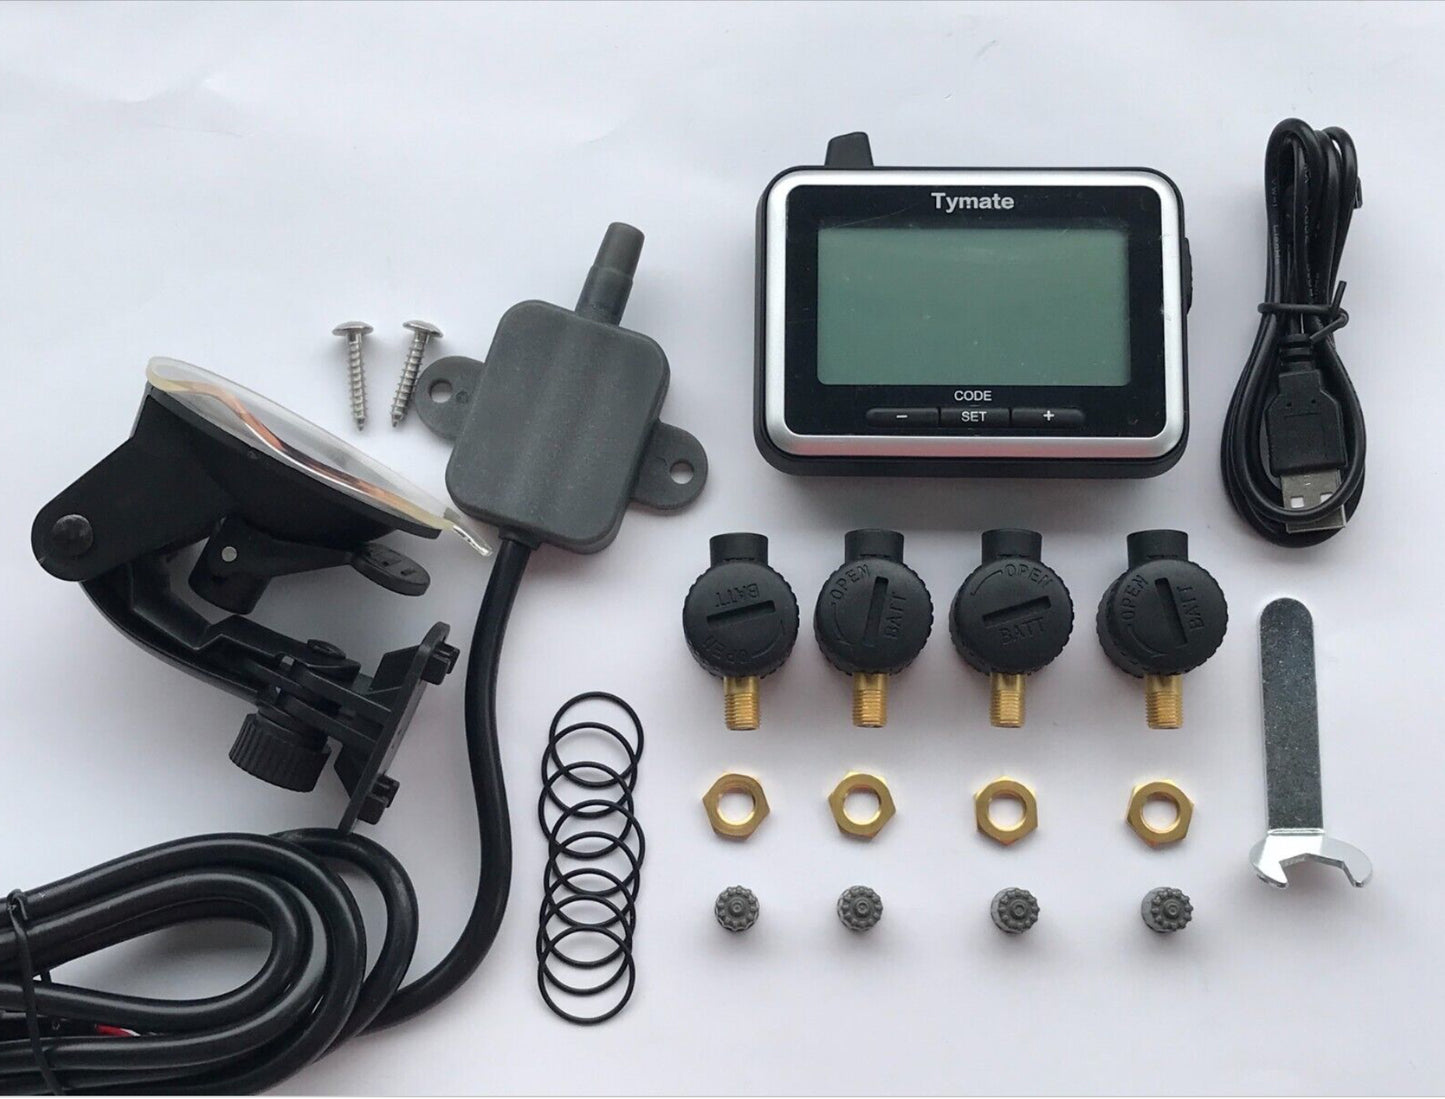 Parksafe Tymate TPMS 34-25 Heavy Duty 4x Tyre Pressure Monitoring System